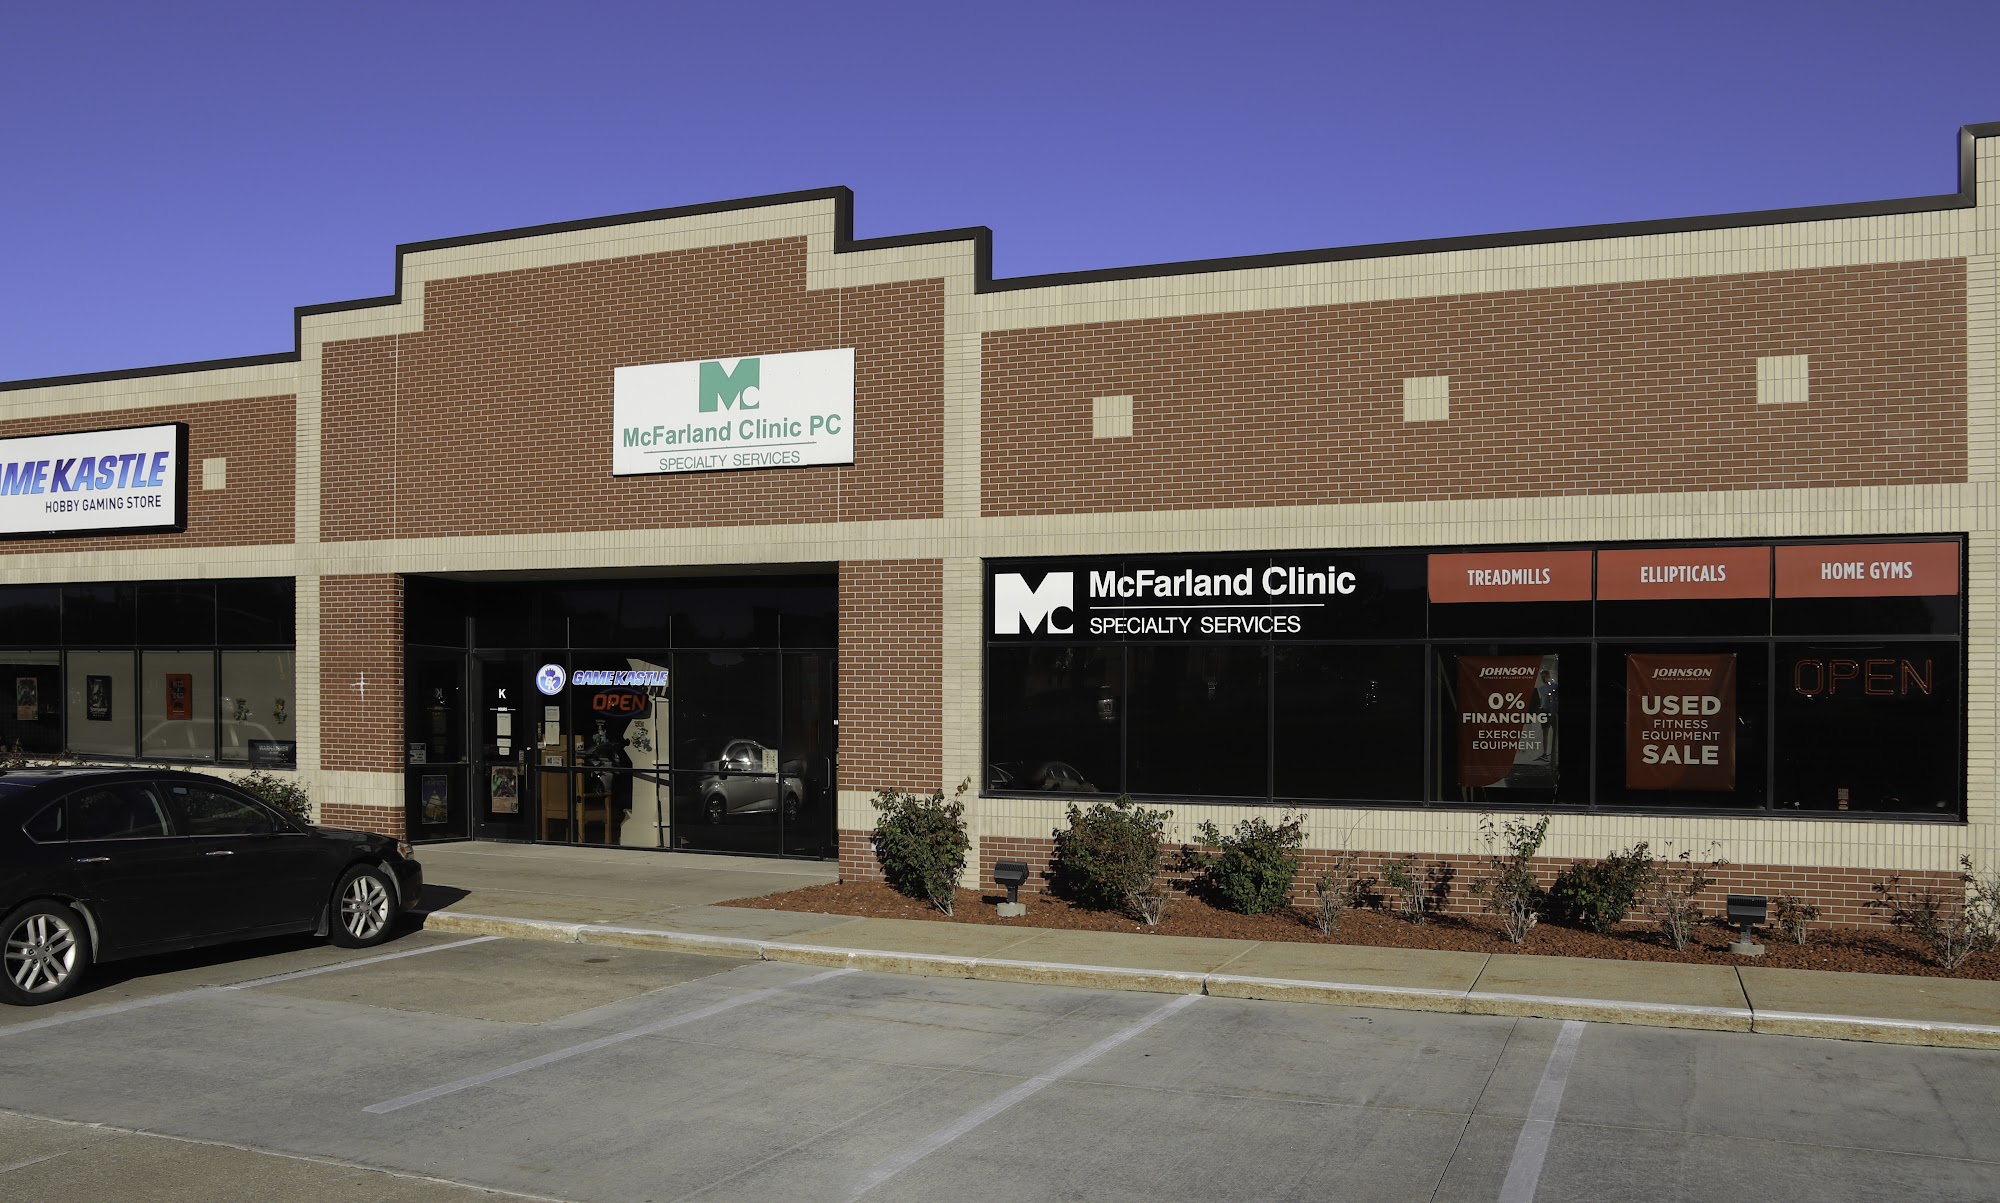 McFarland Clinic Specialty Services